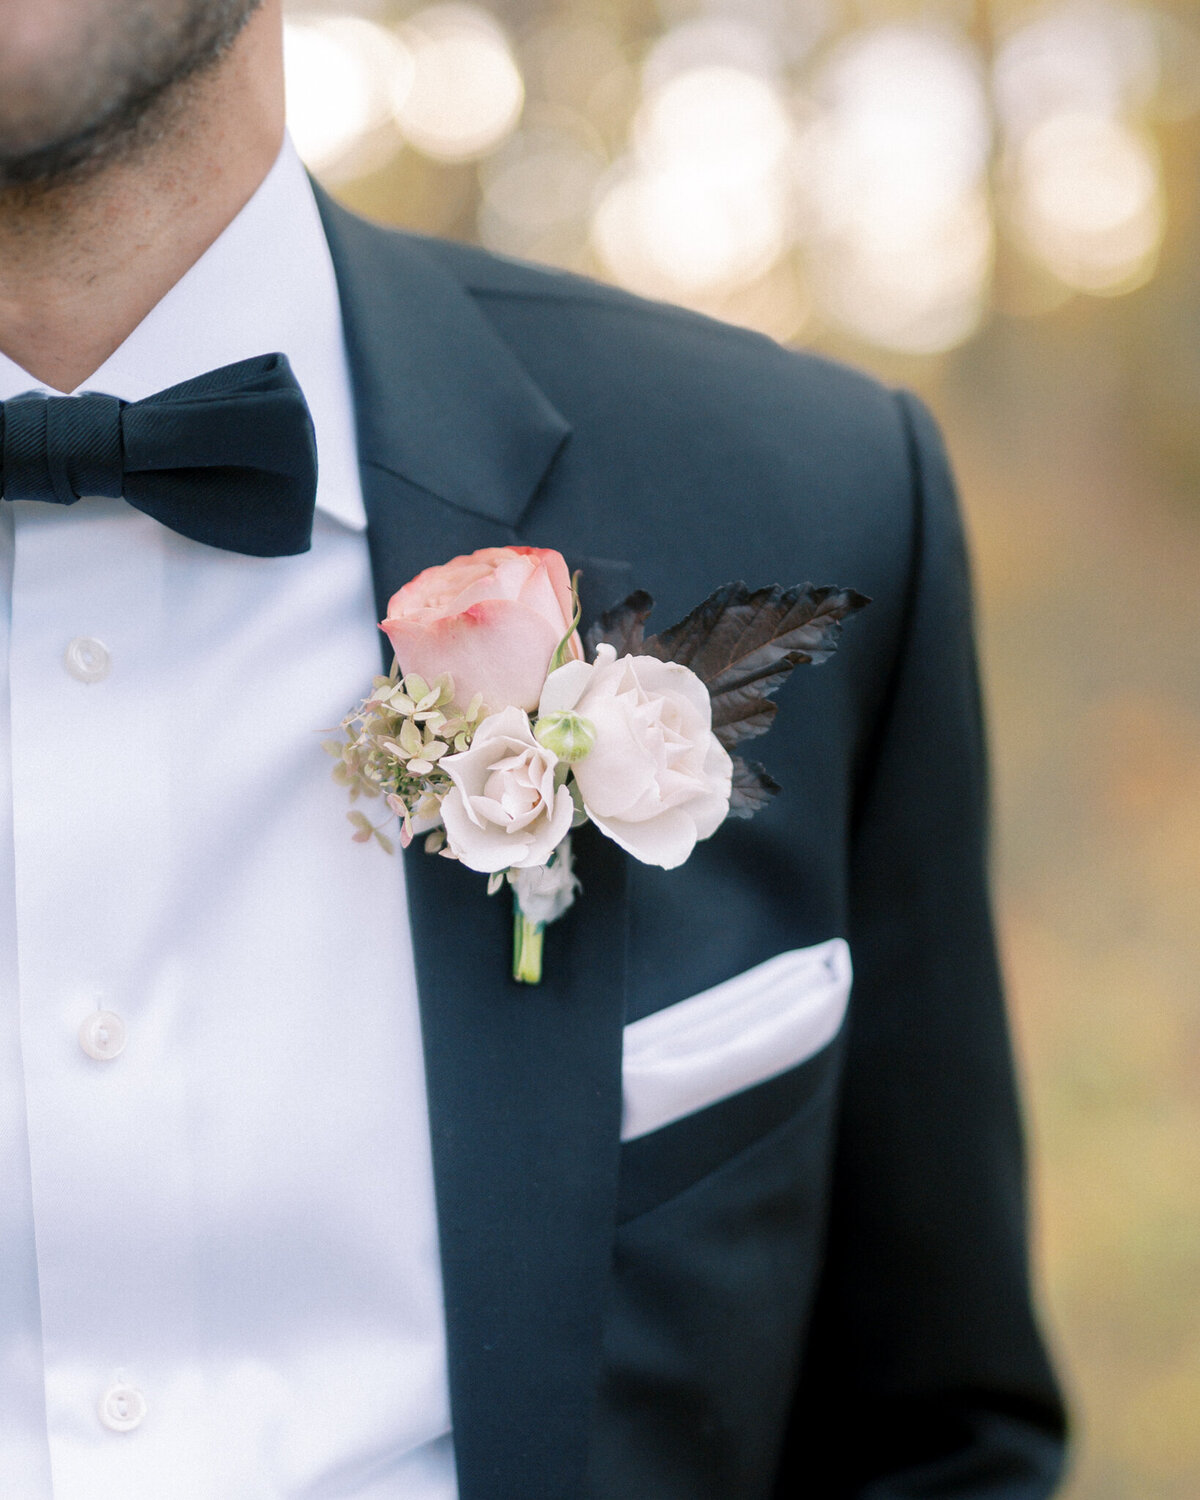 Classic pink boutonniere by Floral & Field Design Co, feminine Calgary, Alberta wedding florist, featured on the Brontë Bride Vendor Guide.